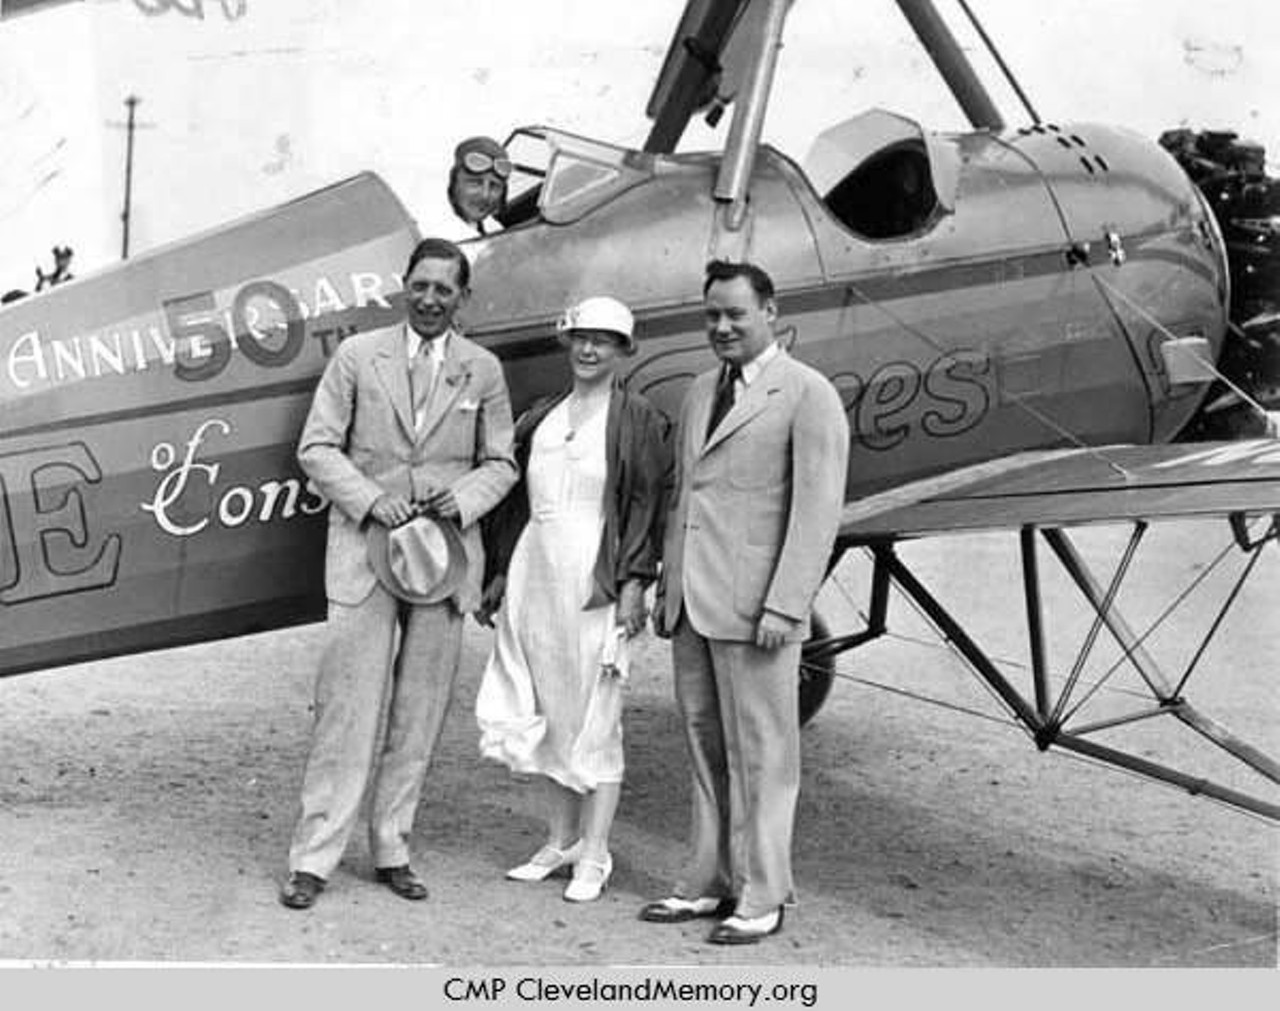  Mayor Miller and Others in Front of Airplane, 1933